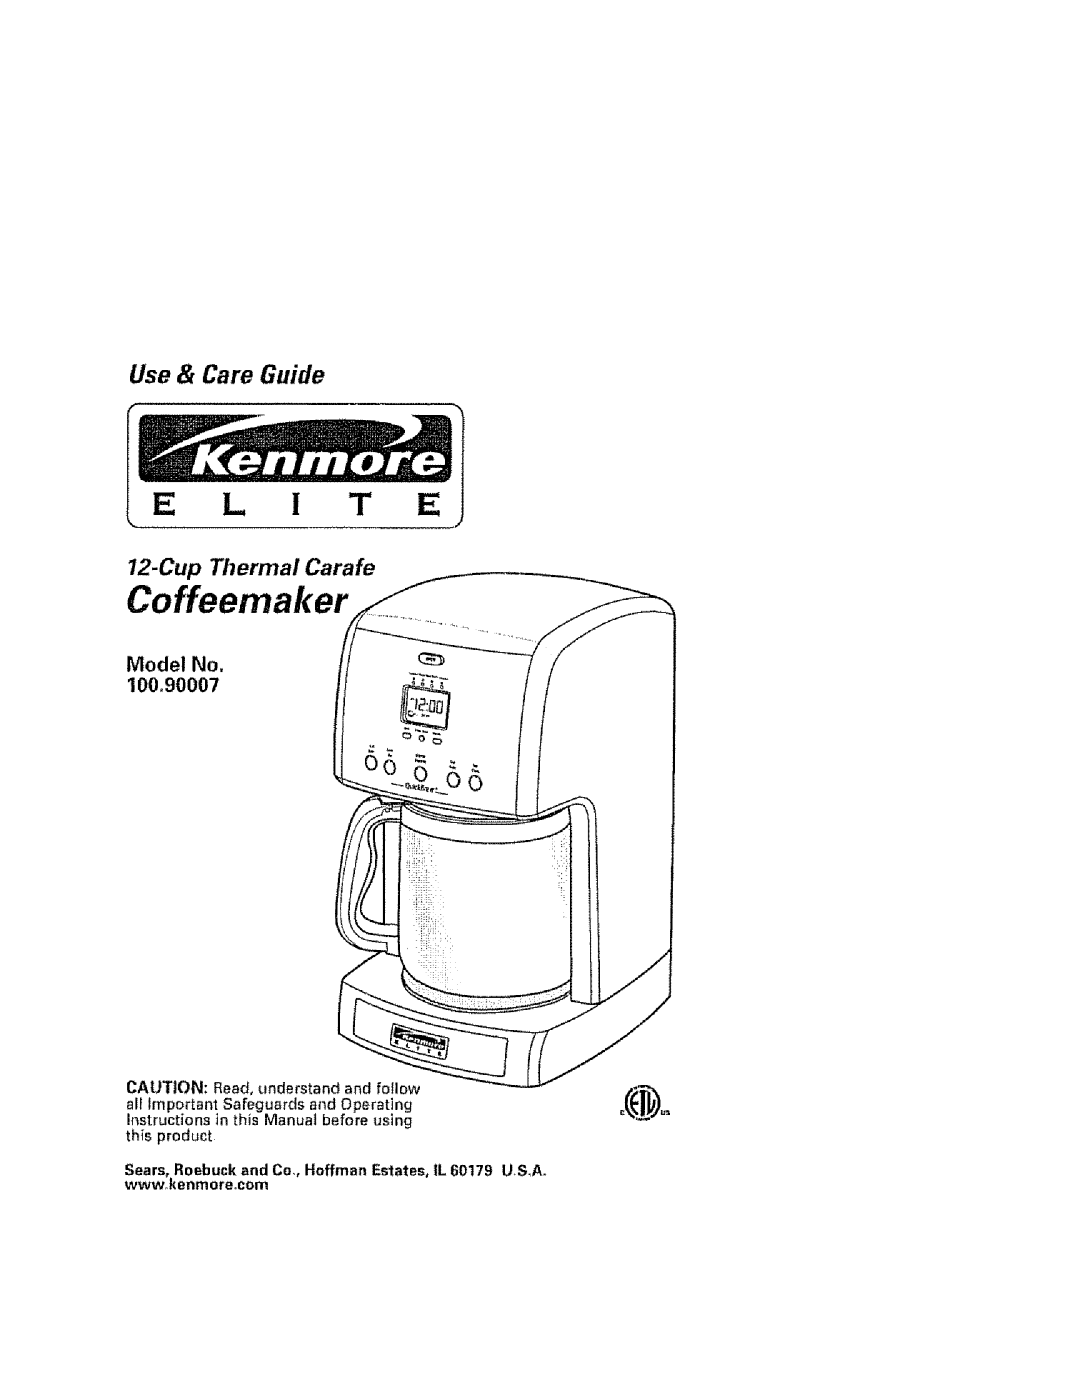 Kenmore 100.90007 operating instructions E L I T E, Coffeemaker, Use& Care Guide, Cup Thermal Carafe, Model No 